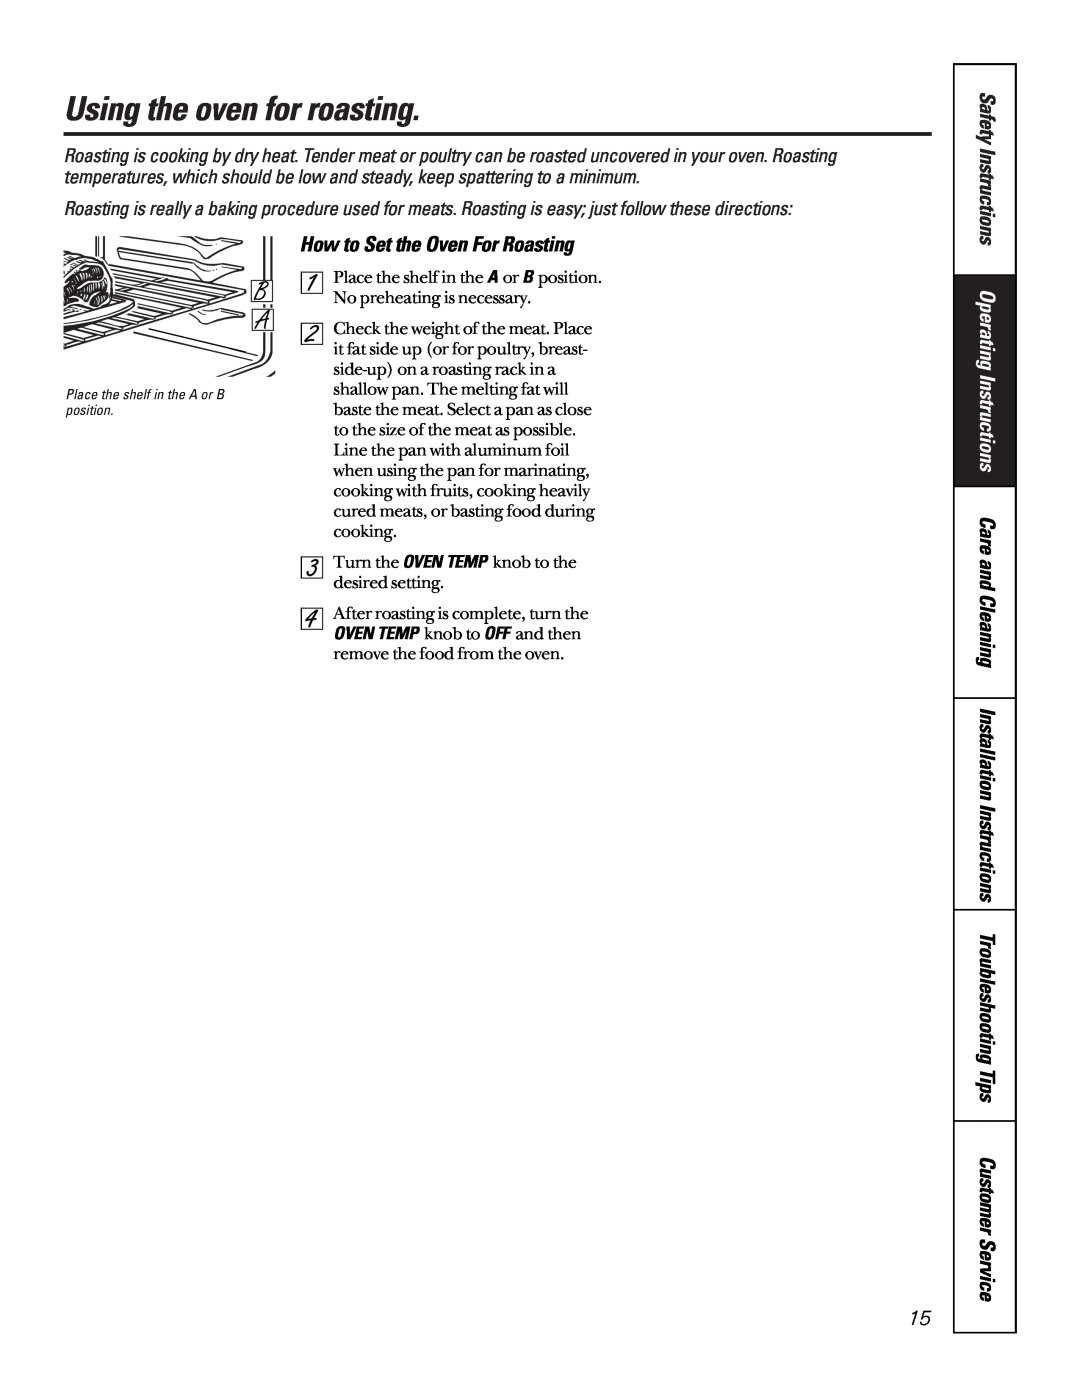 GE 164D3333P185-1 Using the oven for roasting, How to Set the Oven For Roasting, Operating Instructions Care and 